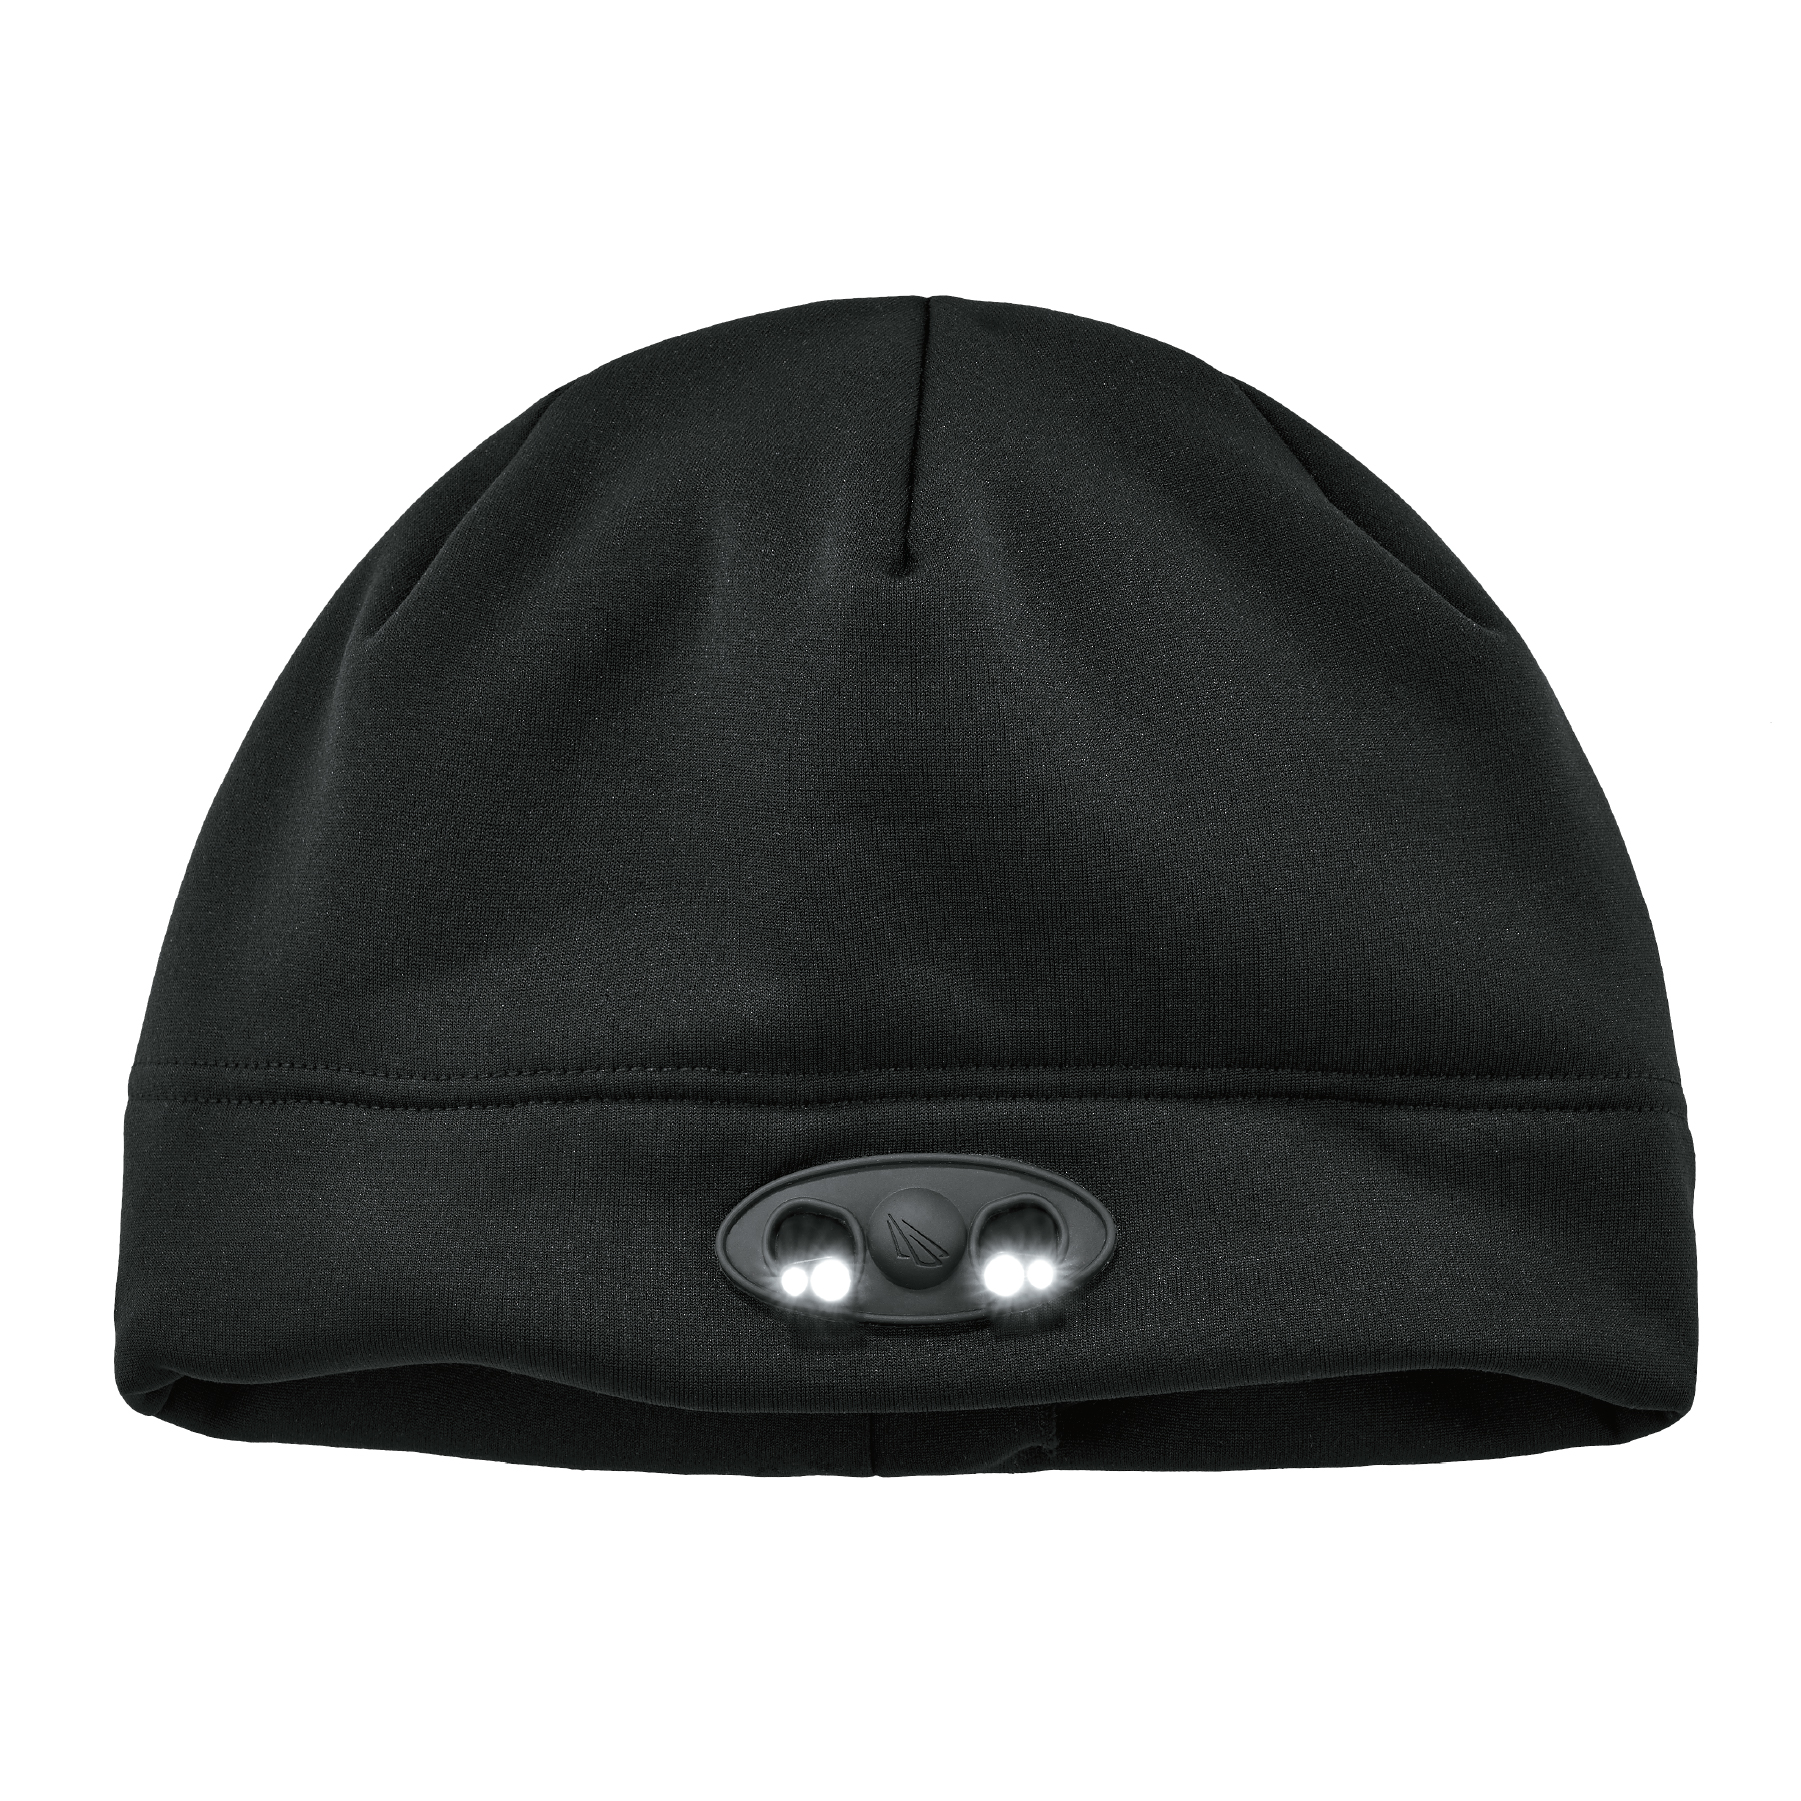 Skull Cap Beanie Hat with LED Lights